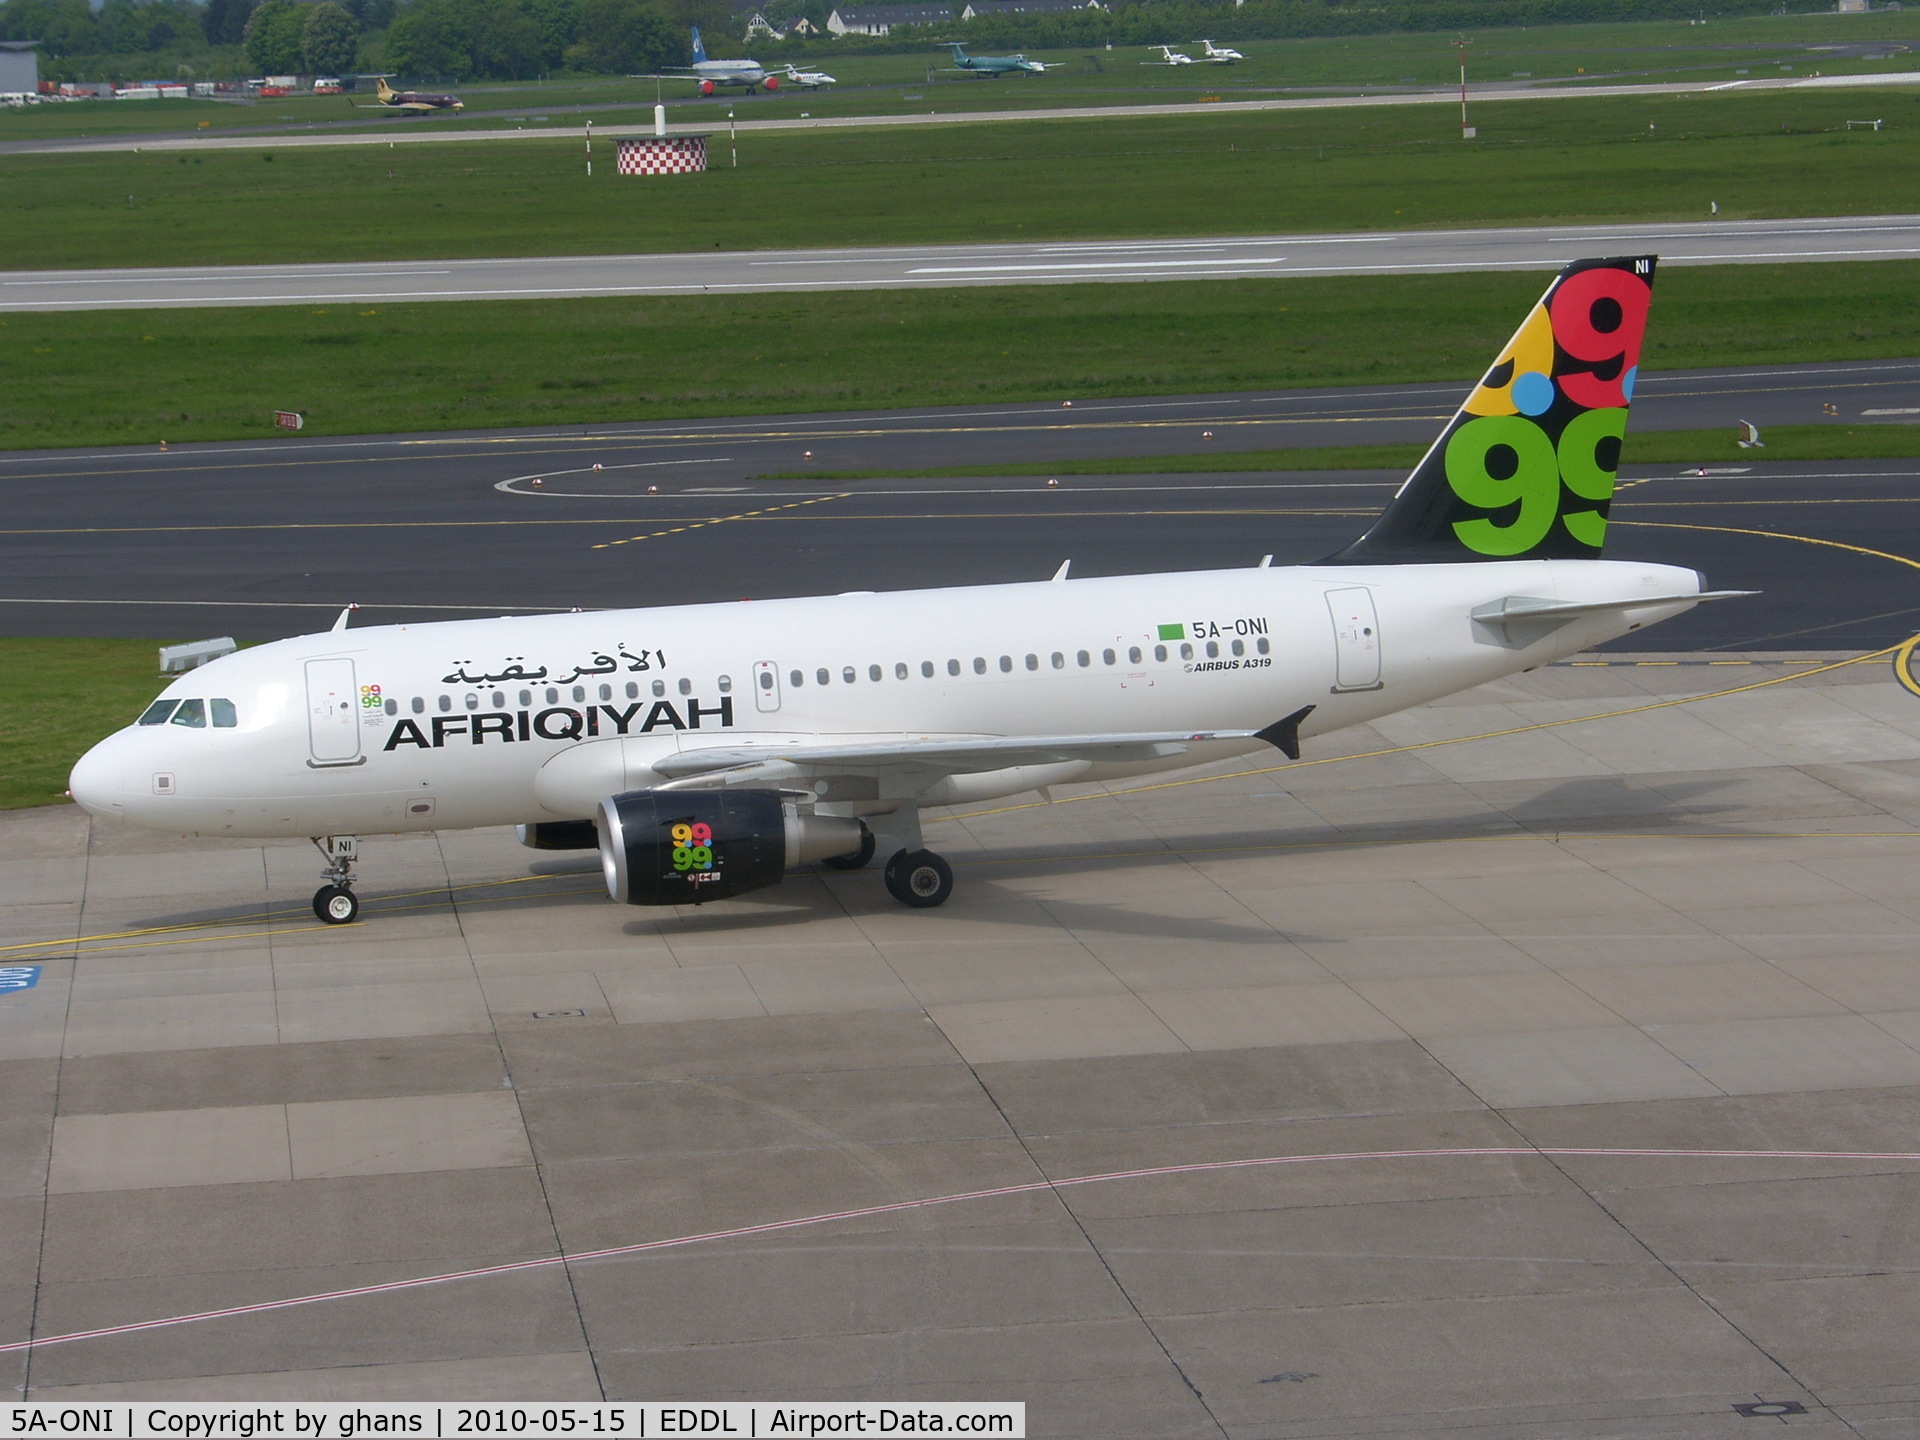 5A-ONI, 2009 Airbus A319-111 C/N 4004, A smaller version Airbus of Afriqiyah